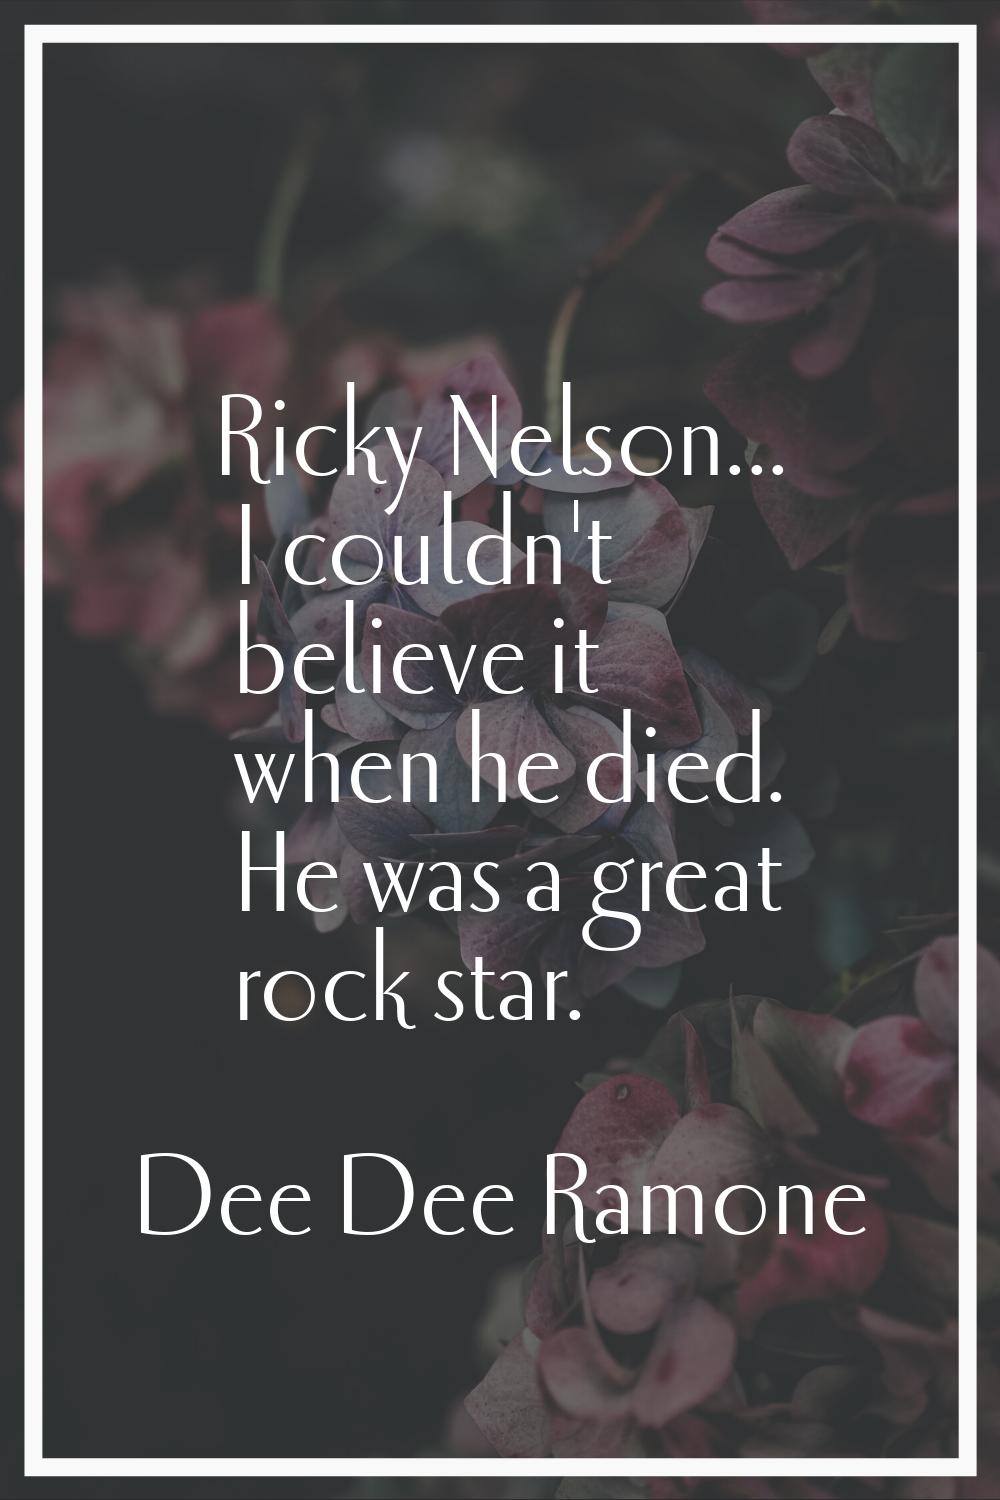 Ricky Nelson... I couldn't believe it when he died. He was a great rock star.